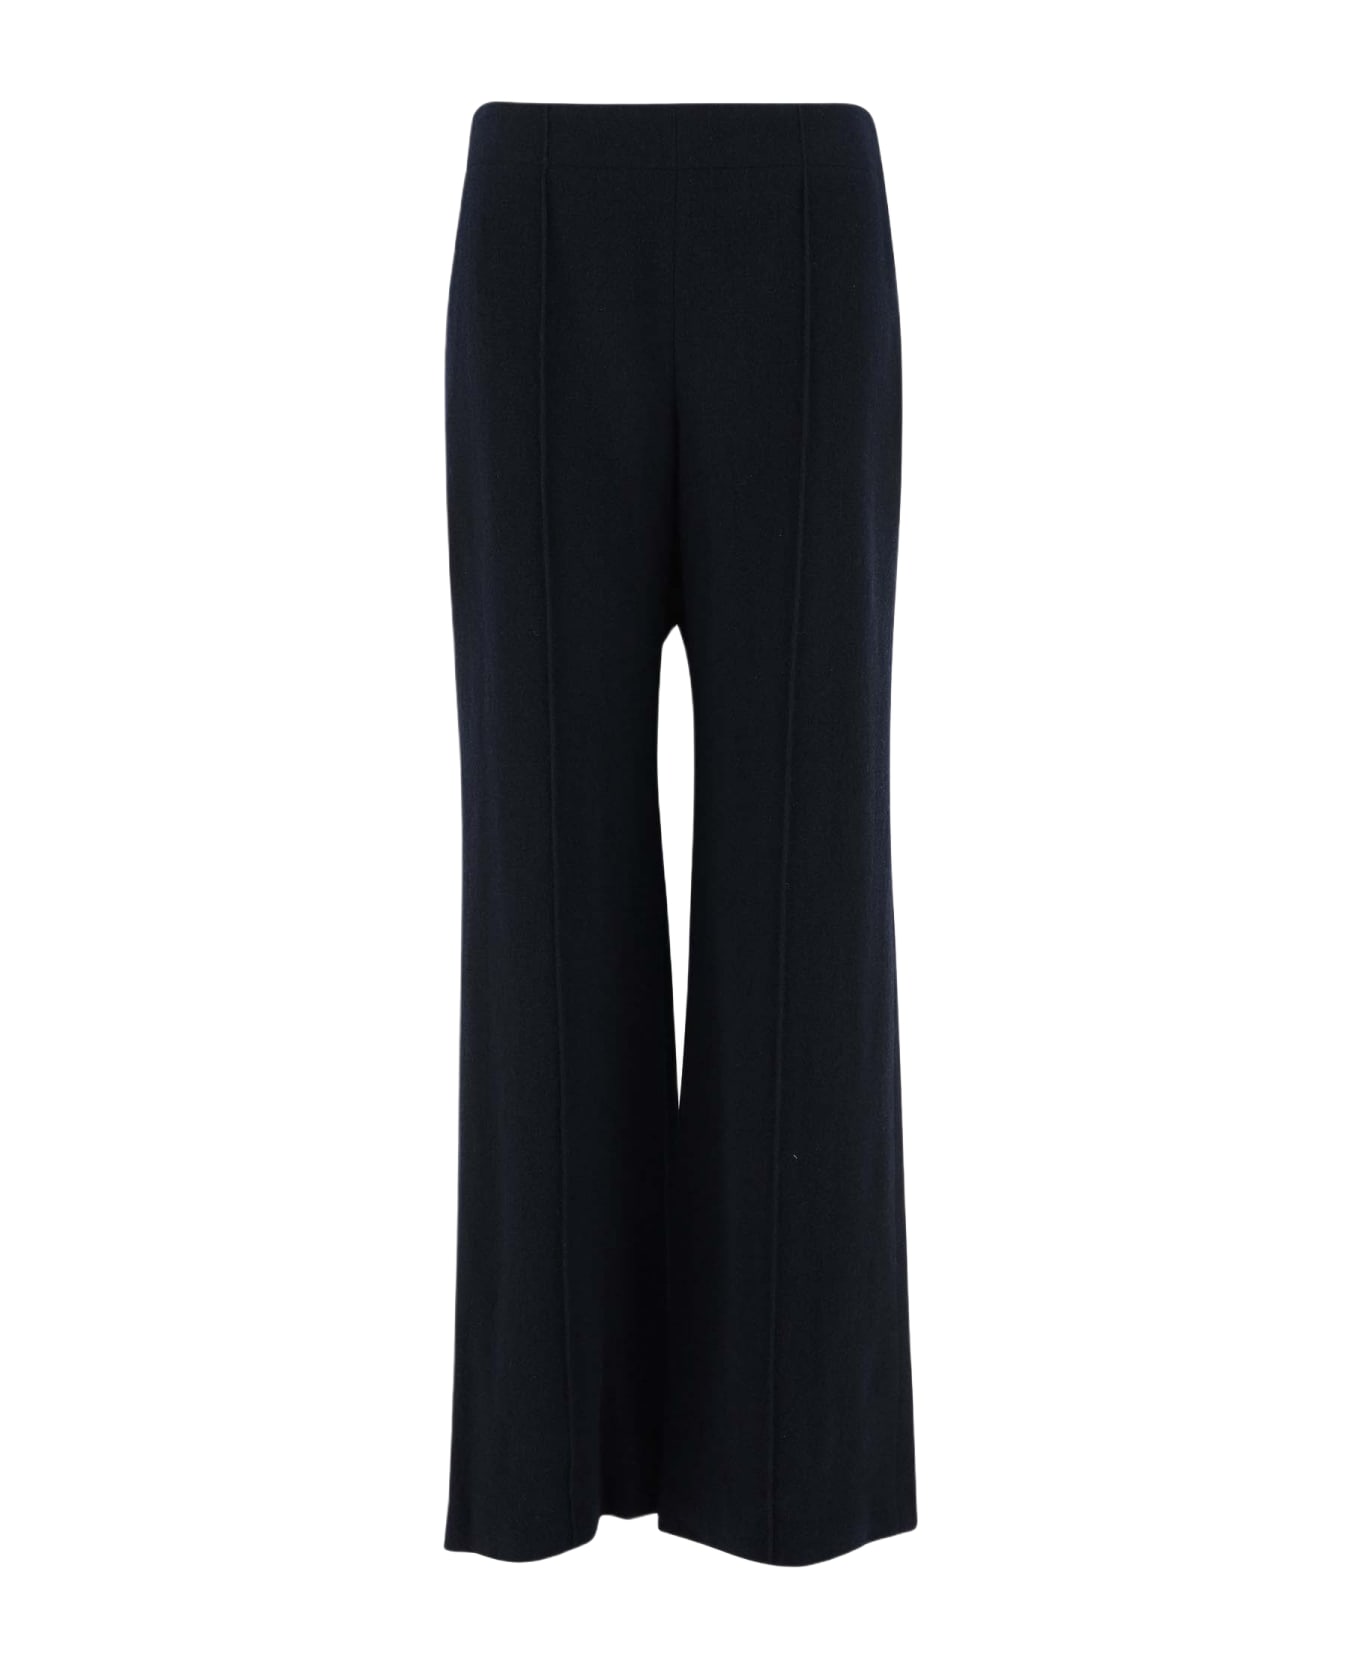 Chloé Wool And Cashmere Blend Pants - Blue ボトムス